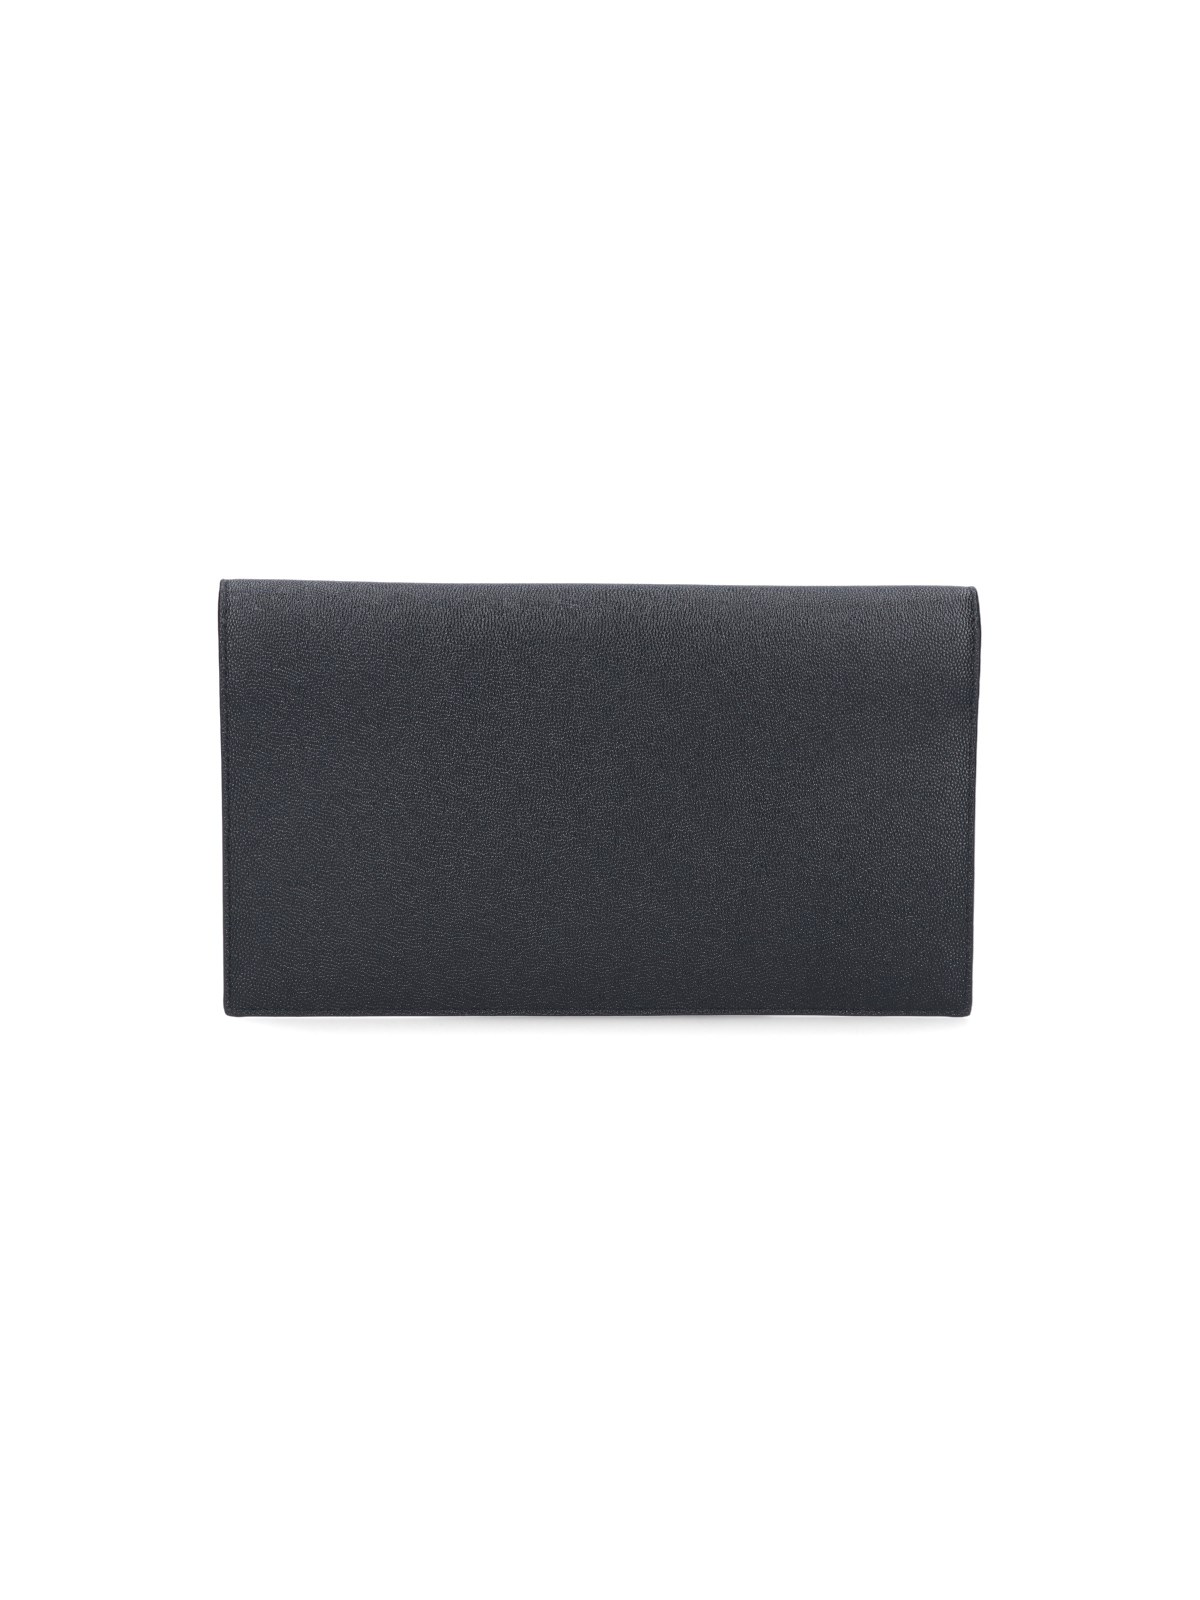 Saint laurent 'uptown' pouch available on SUGAR - 134451